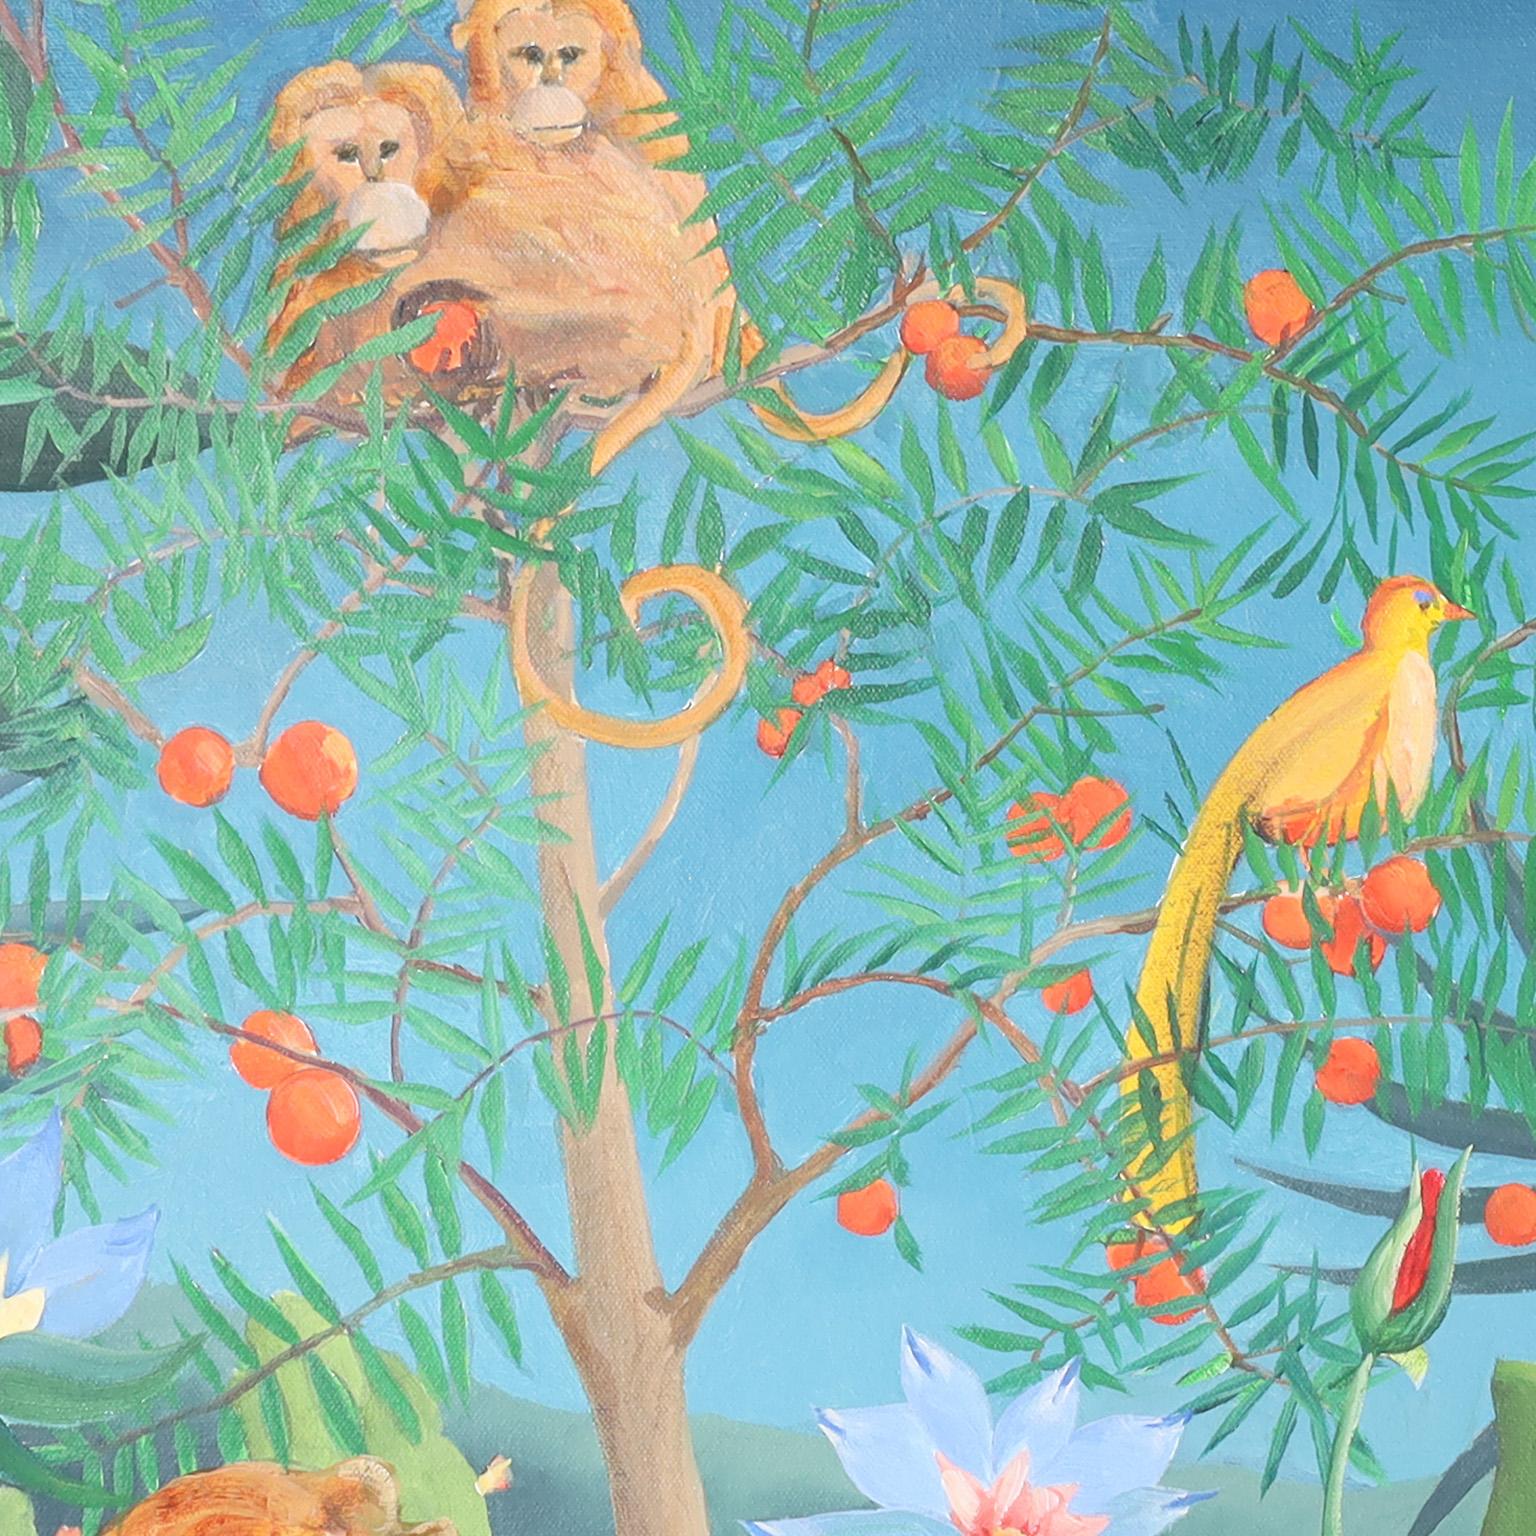 Hand-Painted Painting on Canvas of a Jungle with Cats, Monkeys, and a Woman For Sale